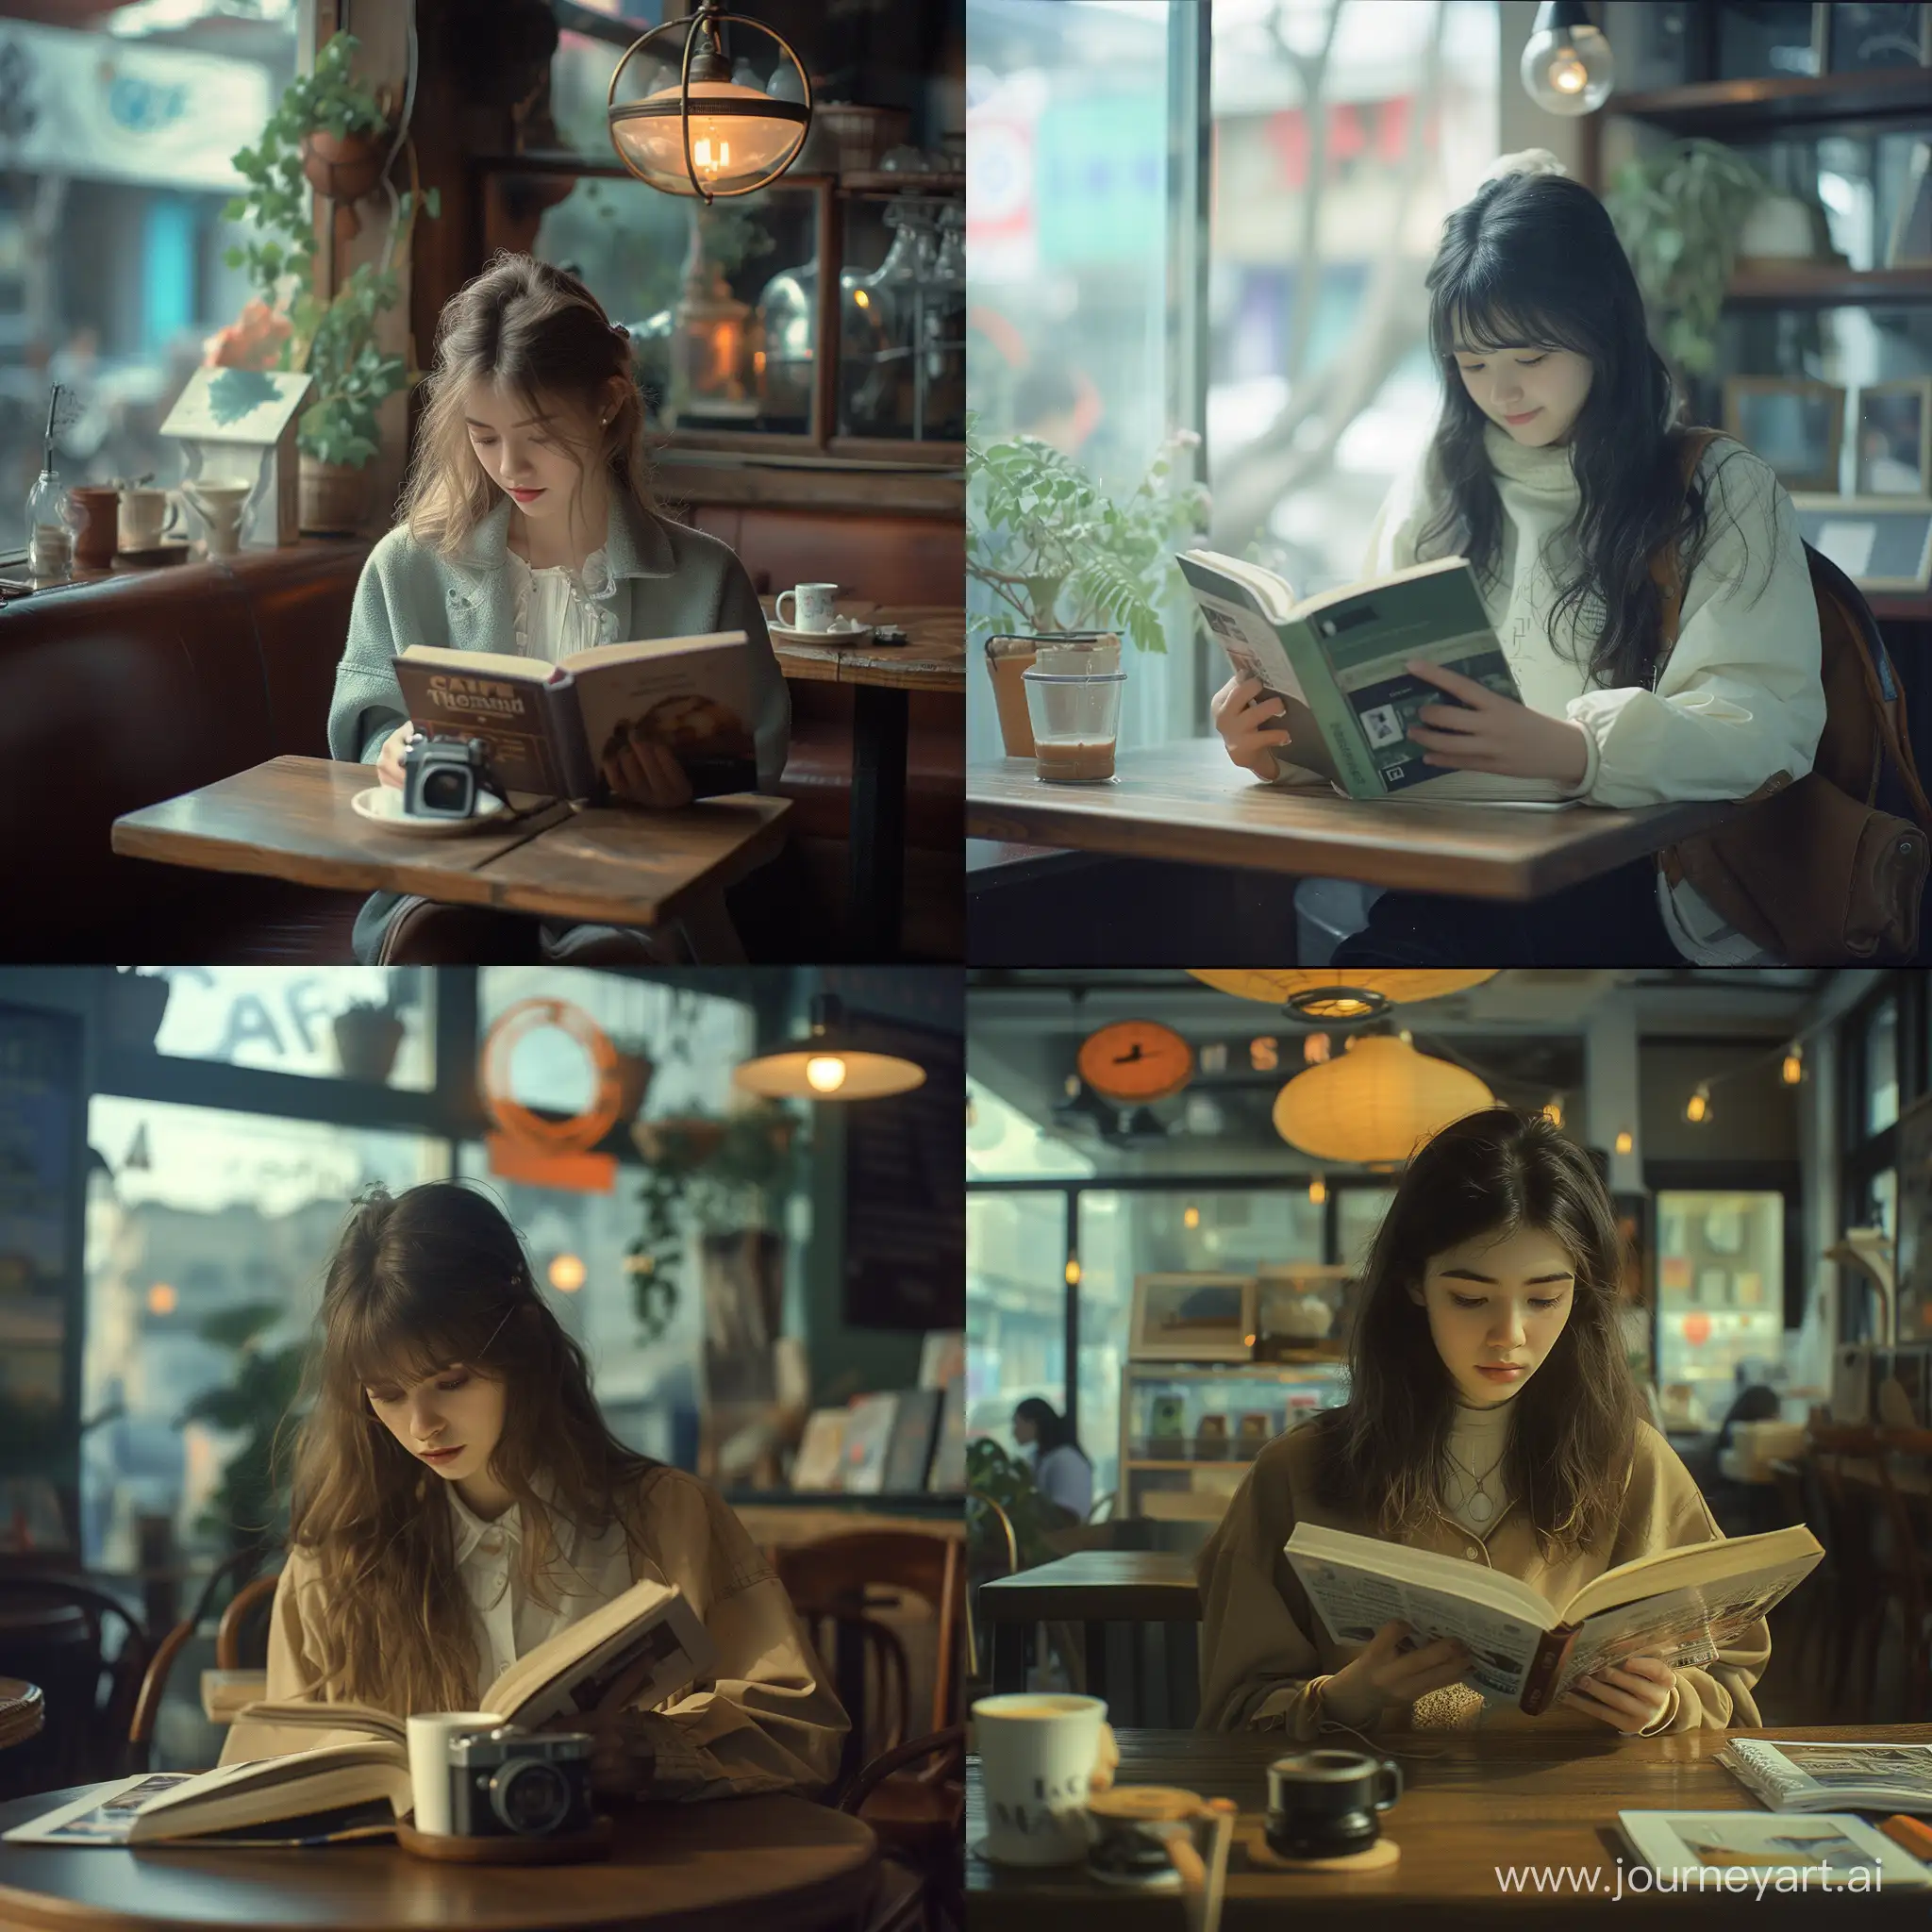 create an aesthetic photorealistic image of a girl reading a book in cafe, candid image, disposable camera